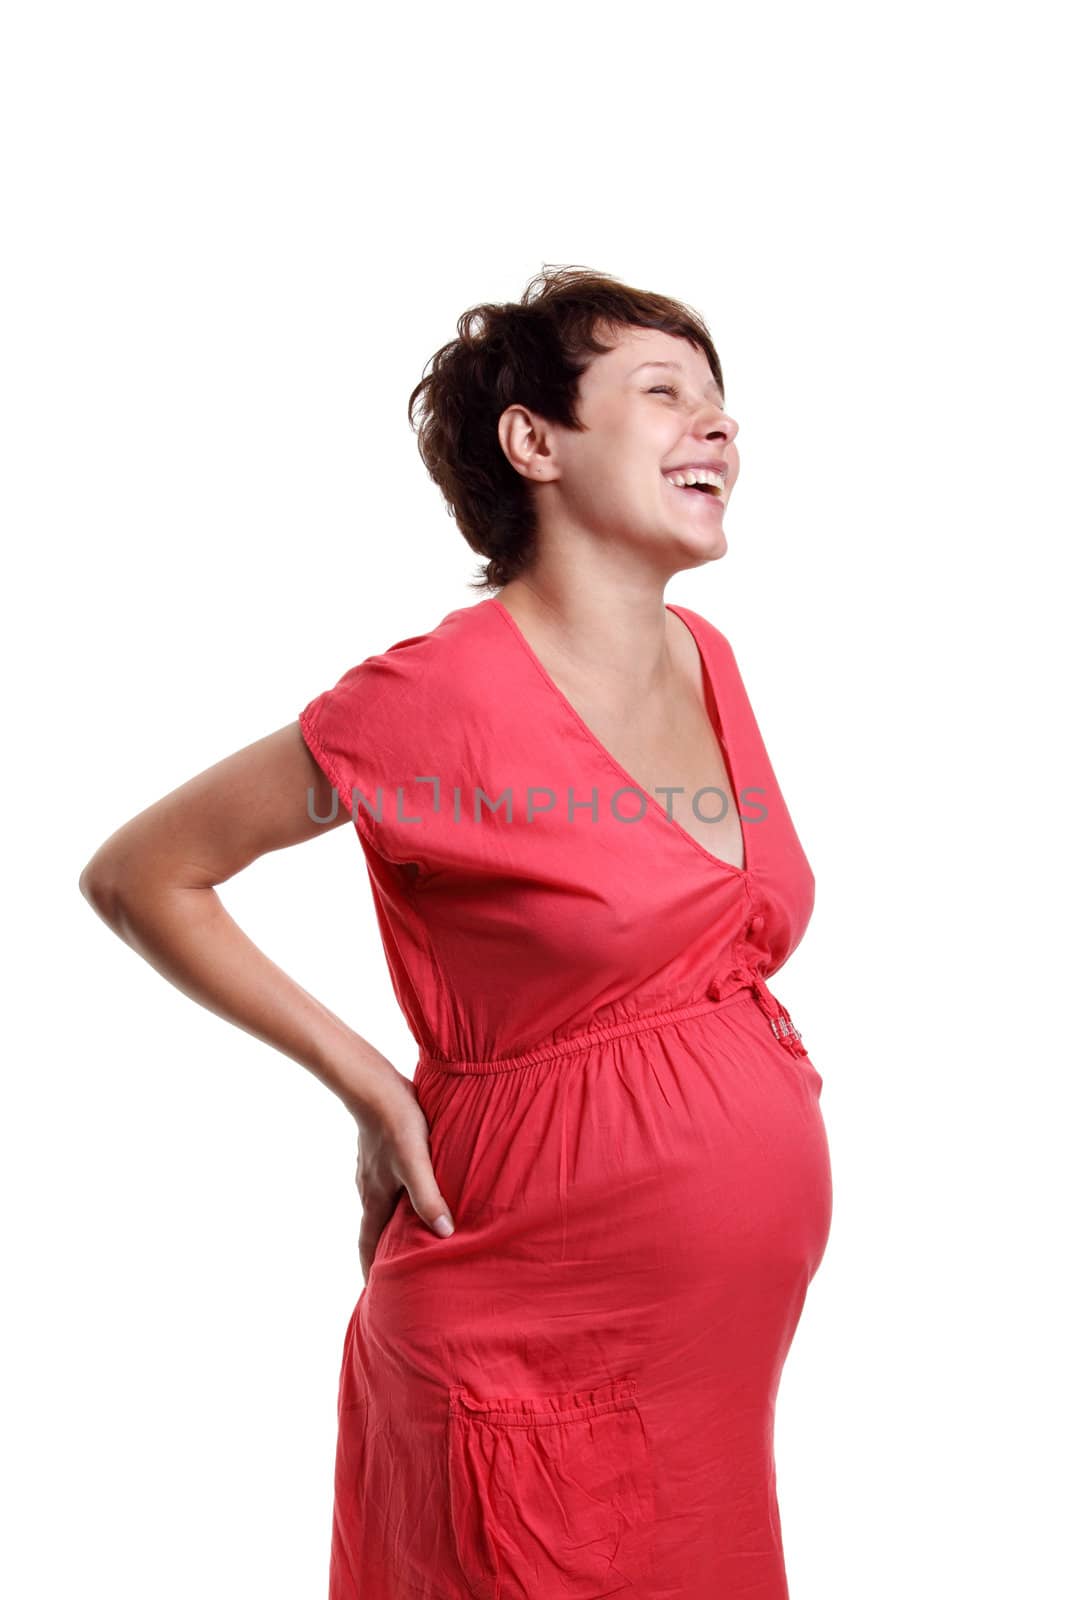 Pregnant young woman in a red shirt by aptyp_kok